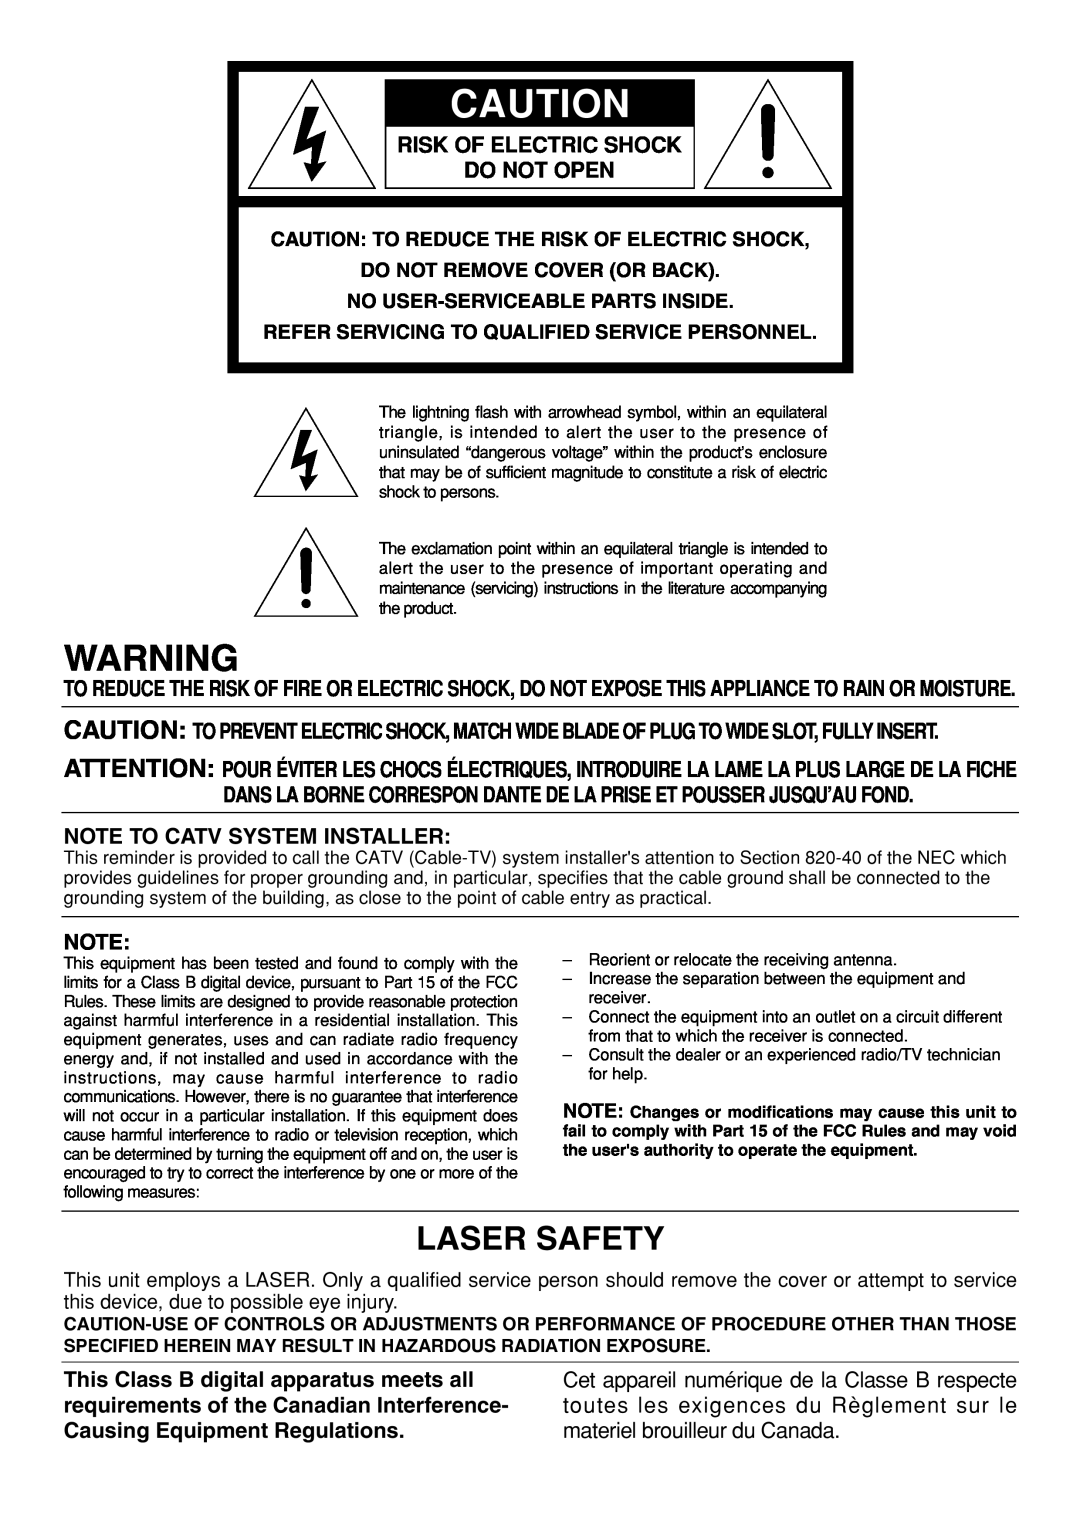 Marantz CC4300 manual Risk Of Electric Shock Do Not Open, Note To Catv System Installer, Laser Safety 